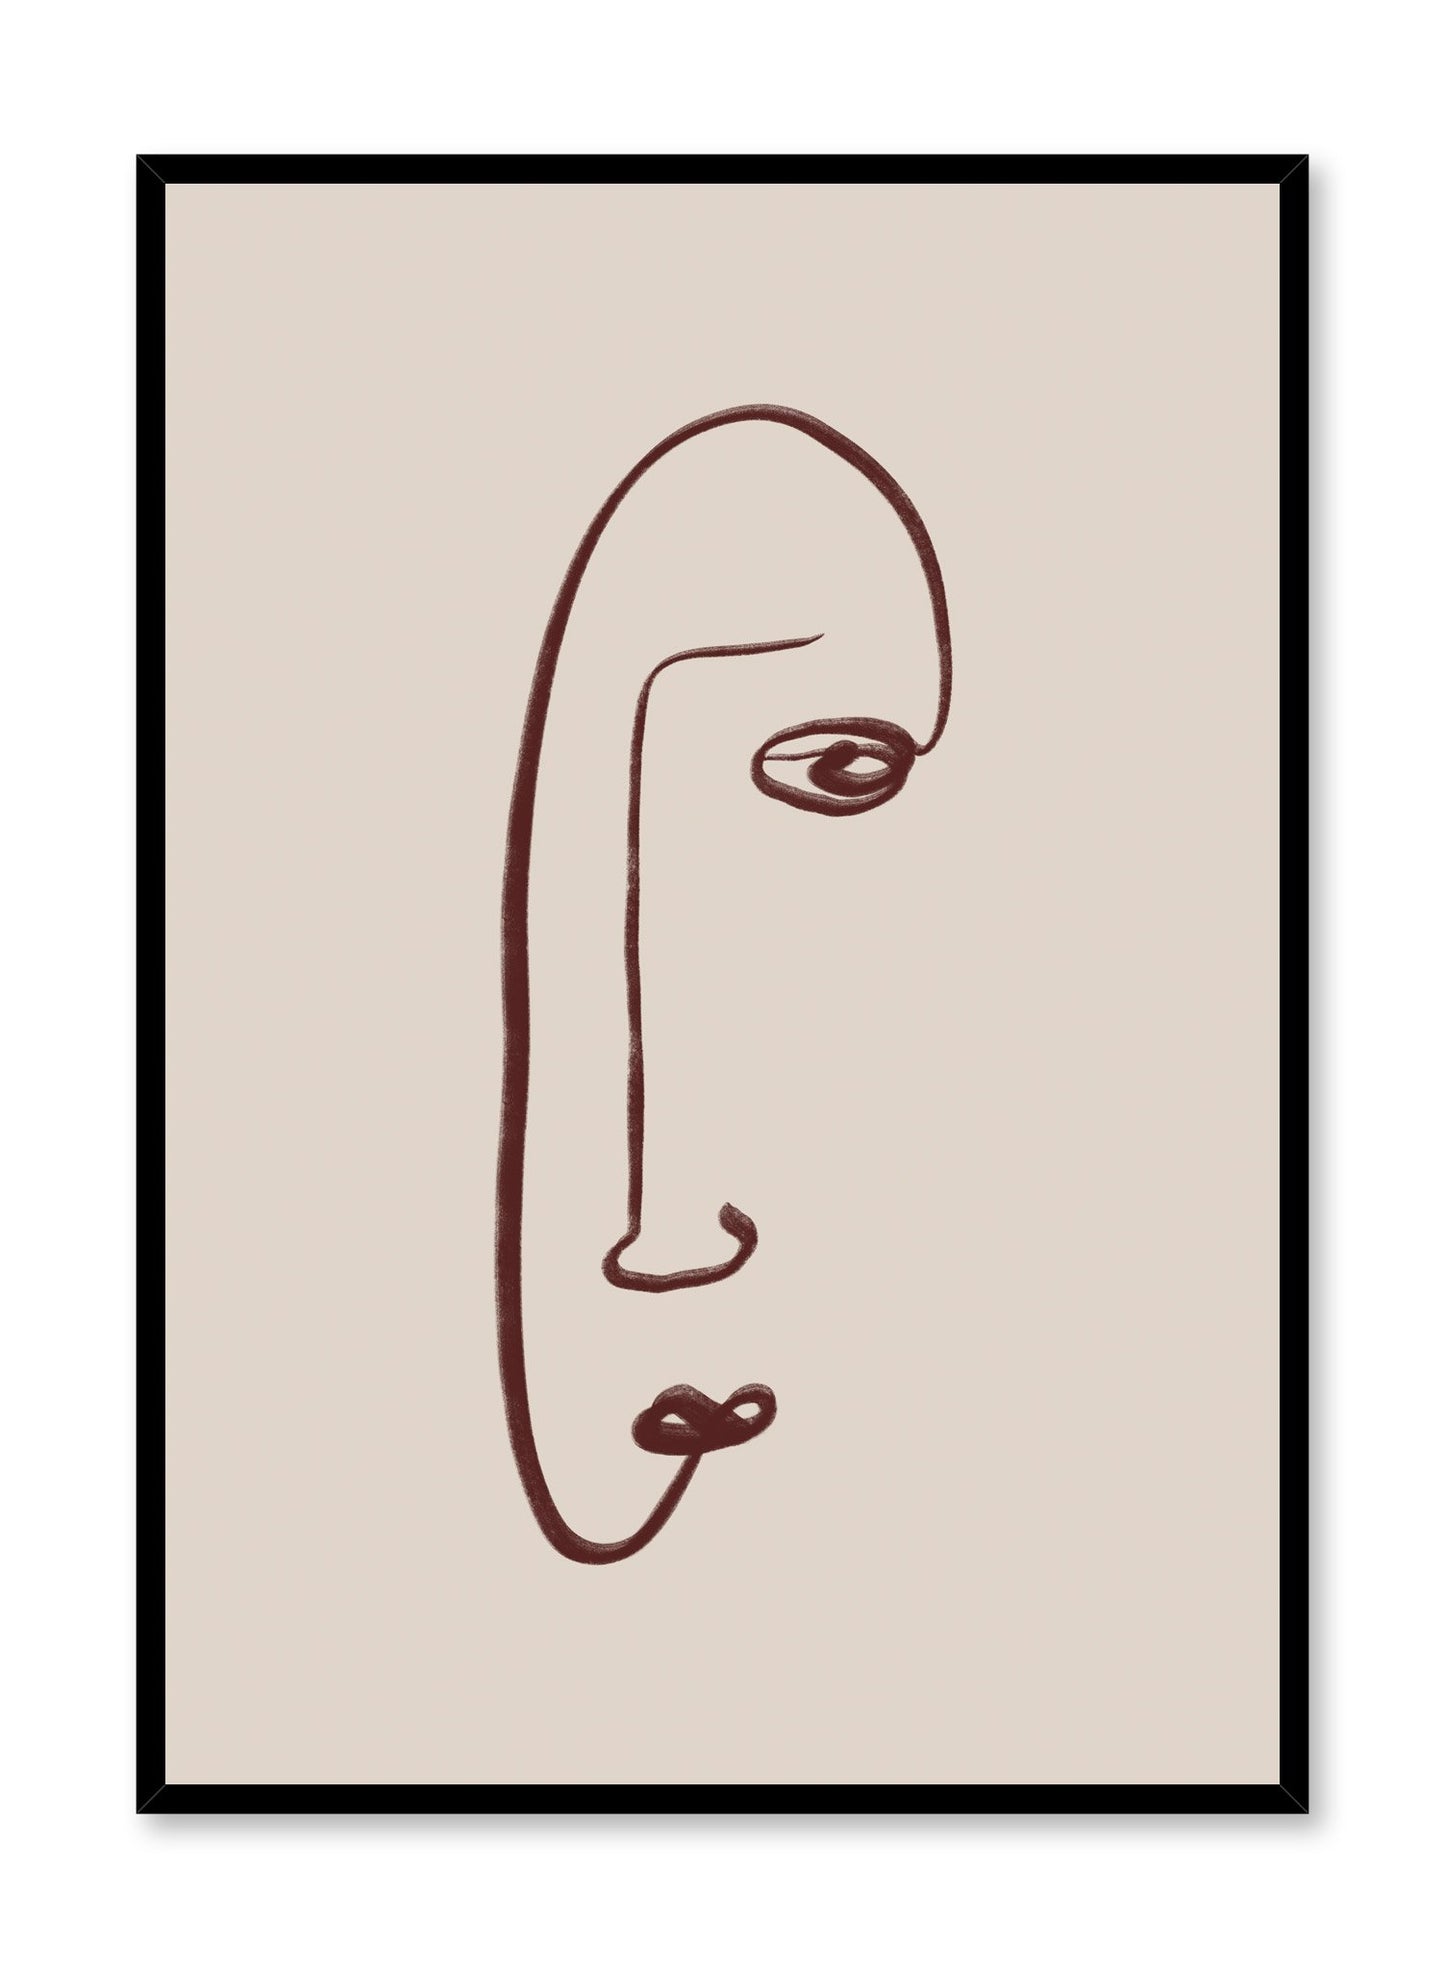 Modern minimalist poster by Opposite Wall with abstract face illustration - Elongated